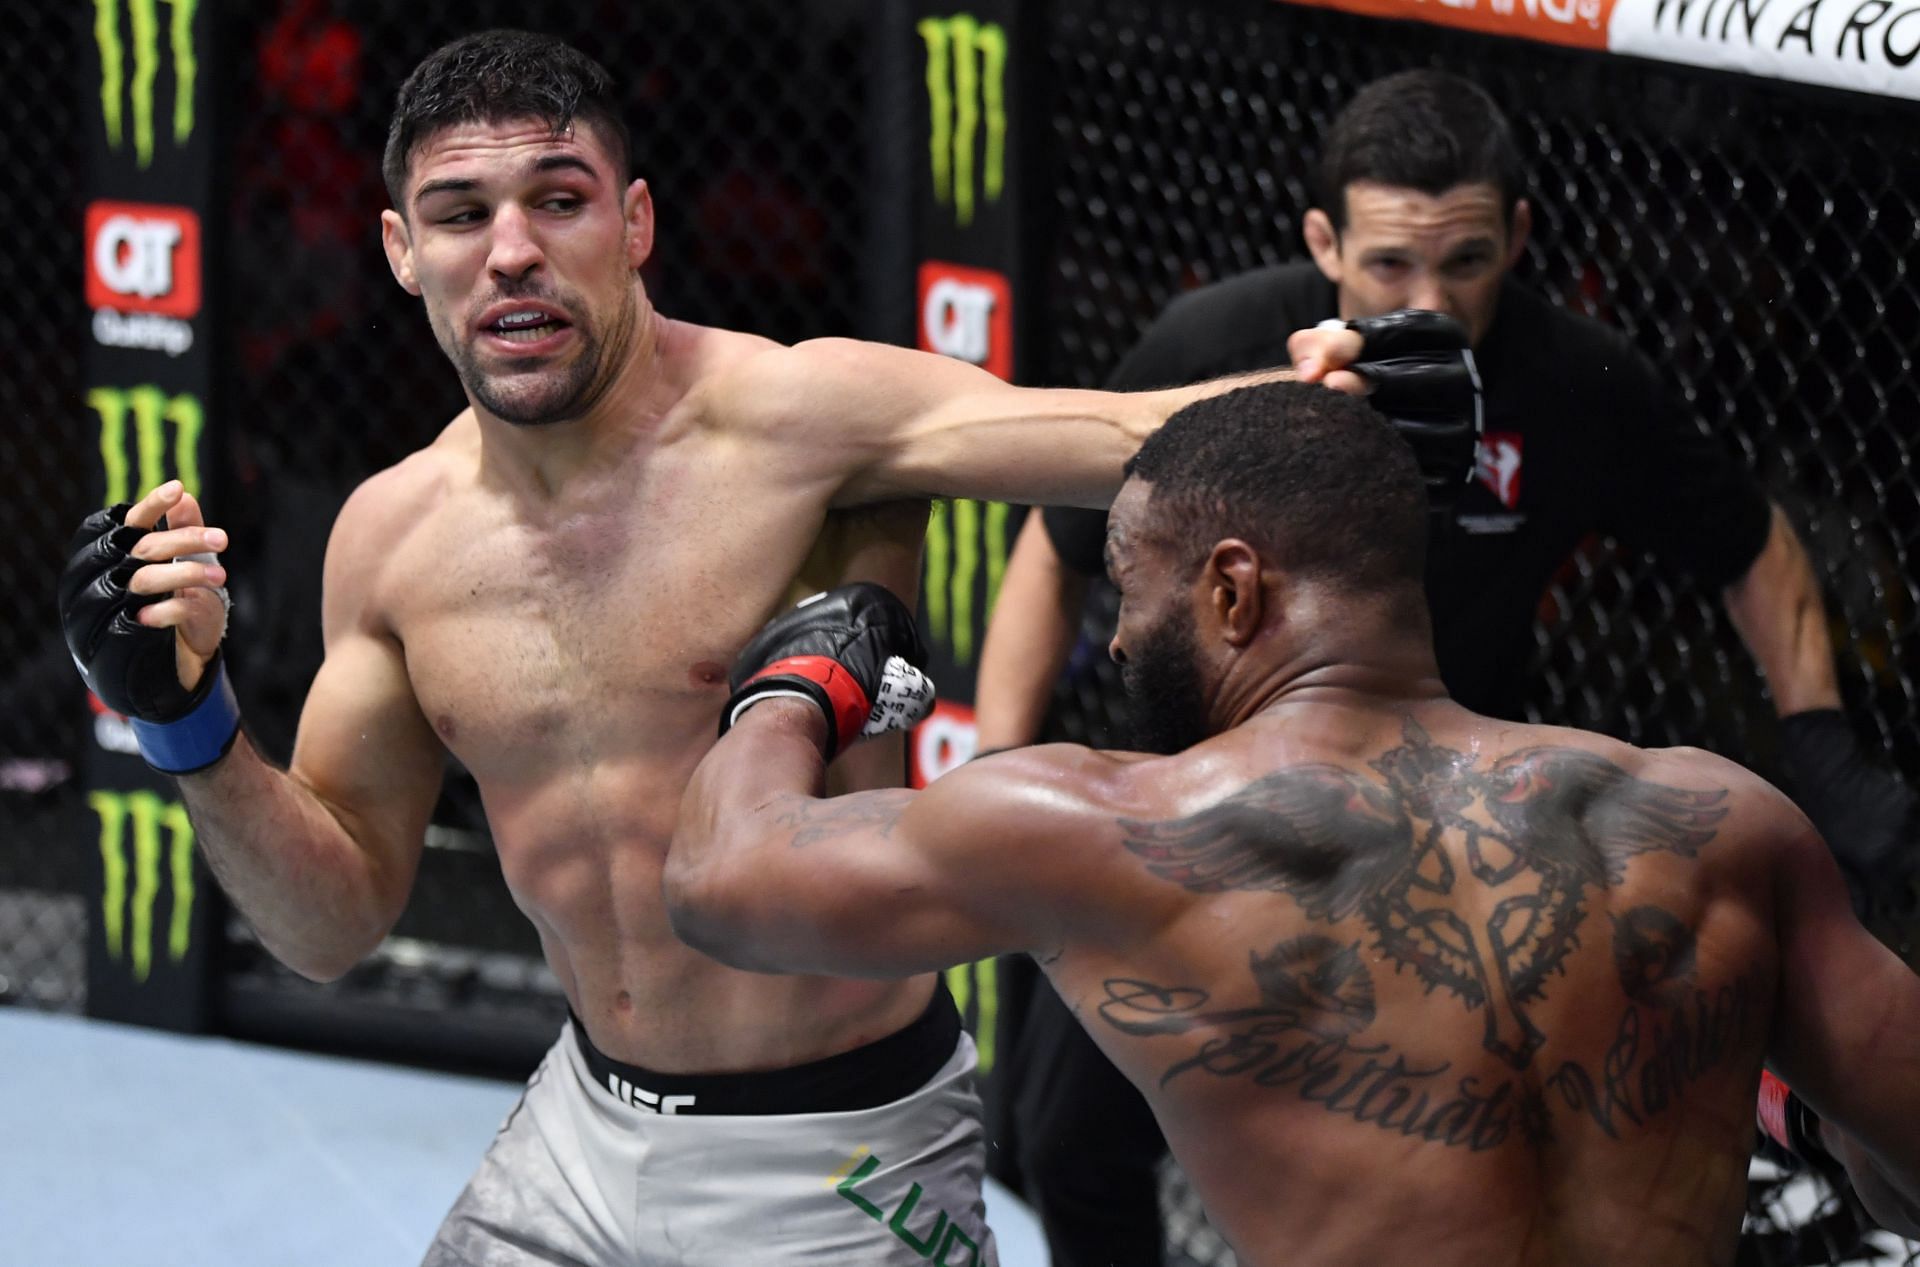 Vicente Luque prefers to let his fighting do the talking for him